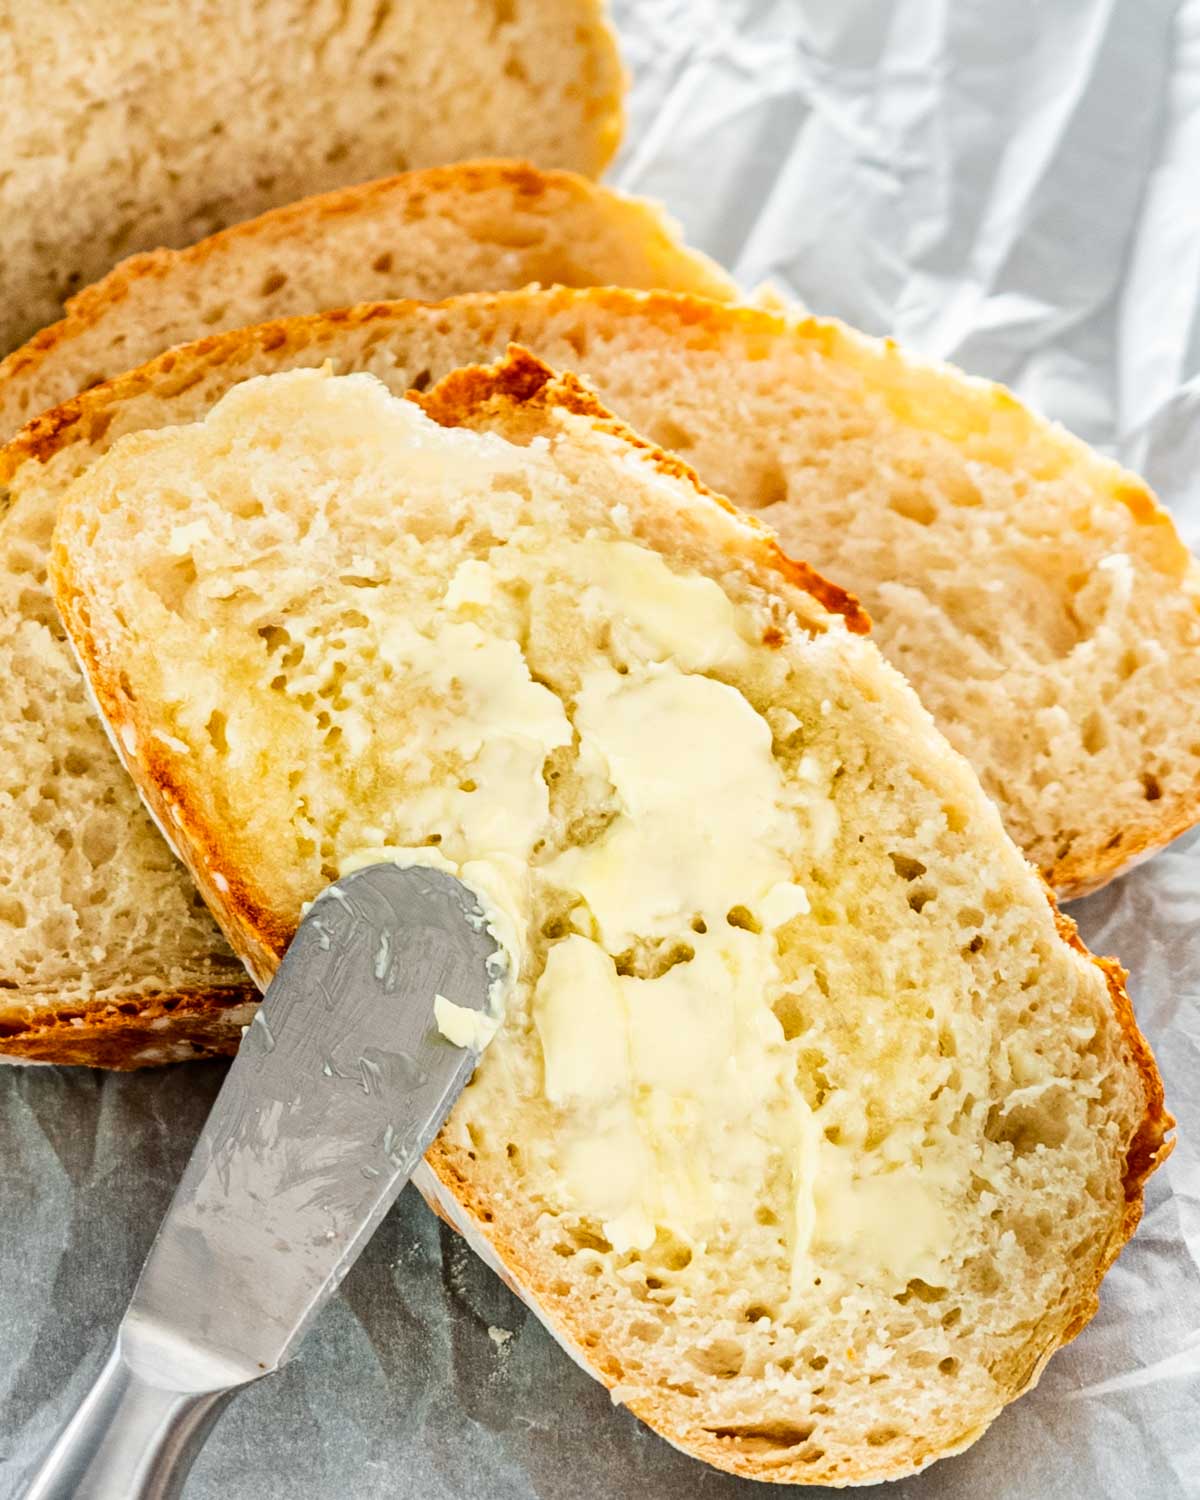 spreading butter on a slice of bread.